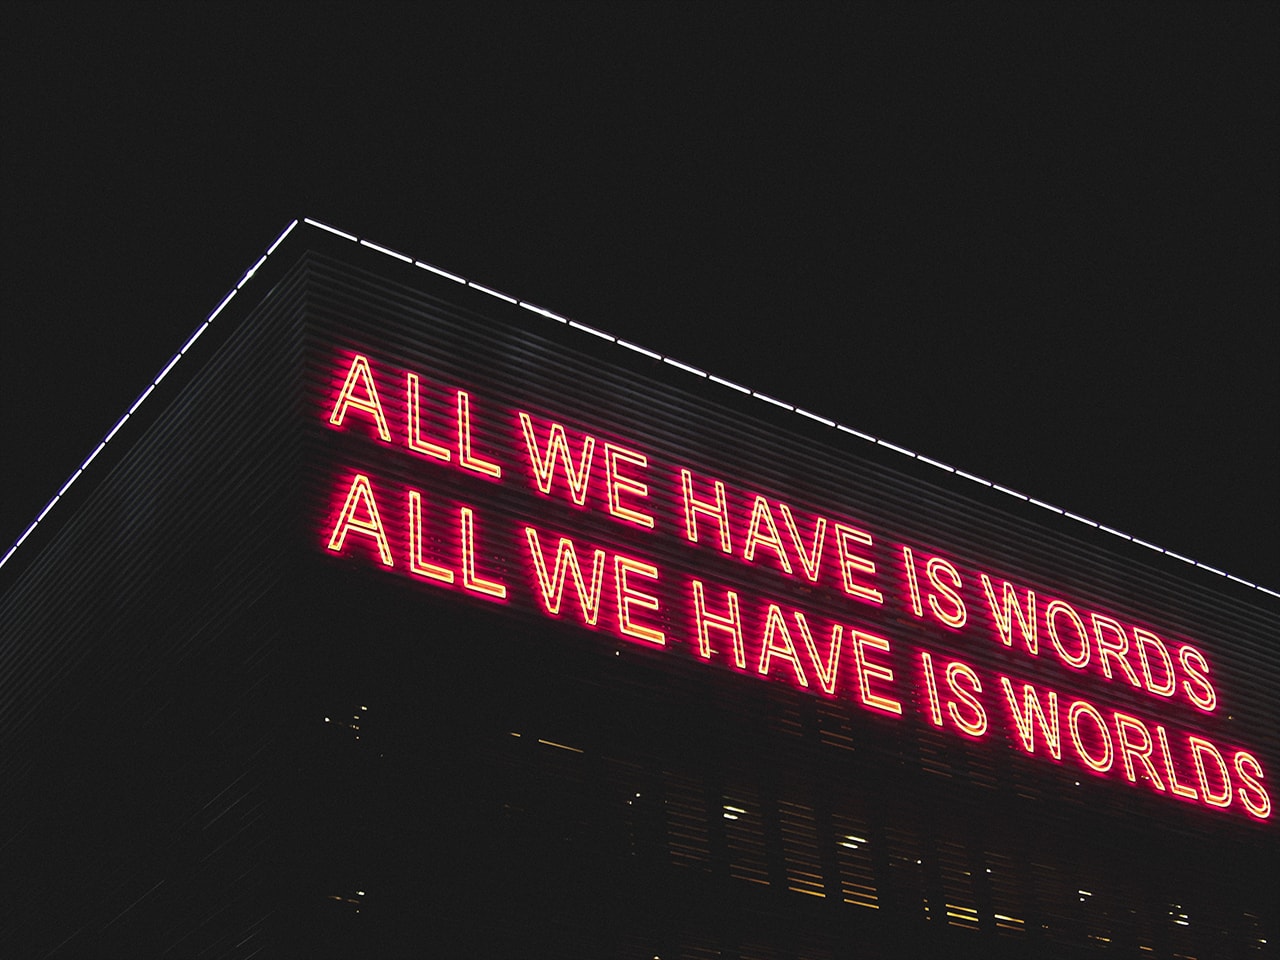 Building with a neon sign saying all we have is words all we have is worlds